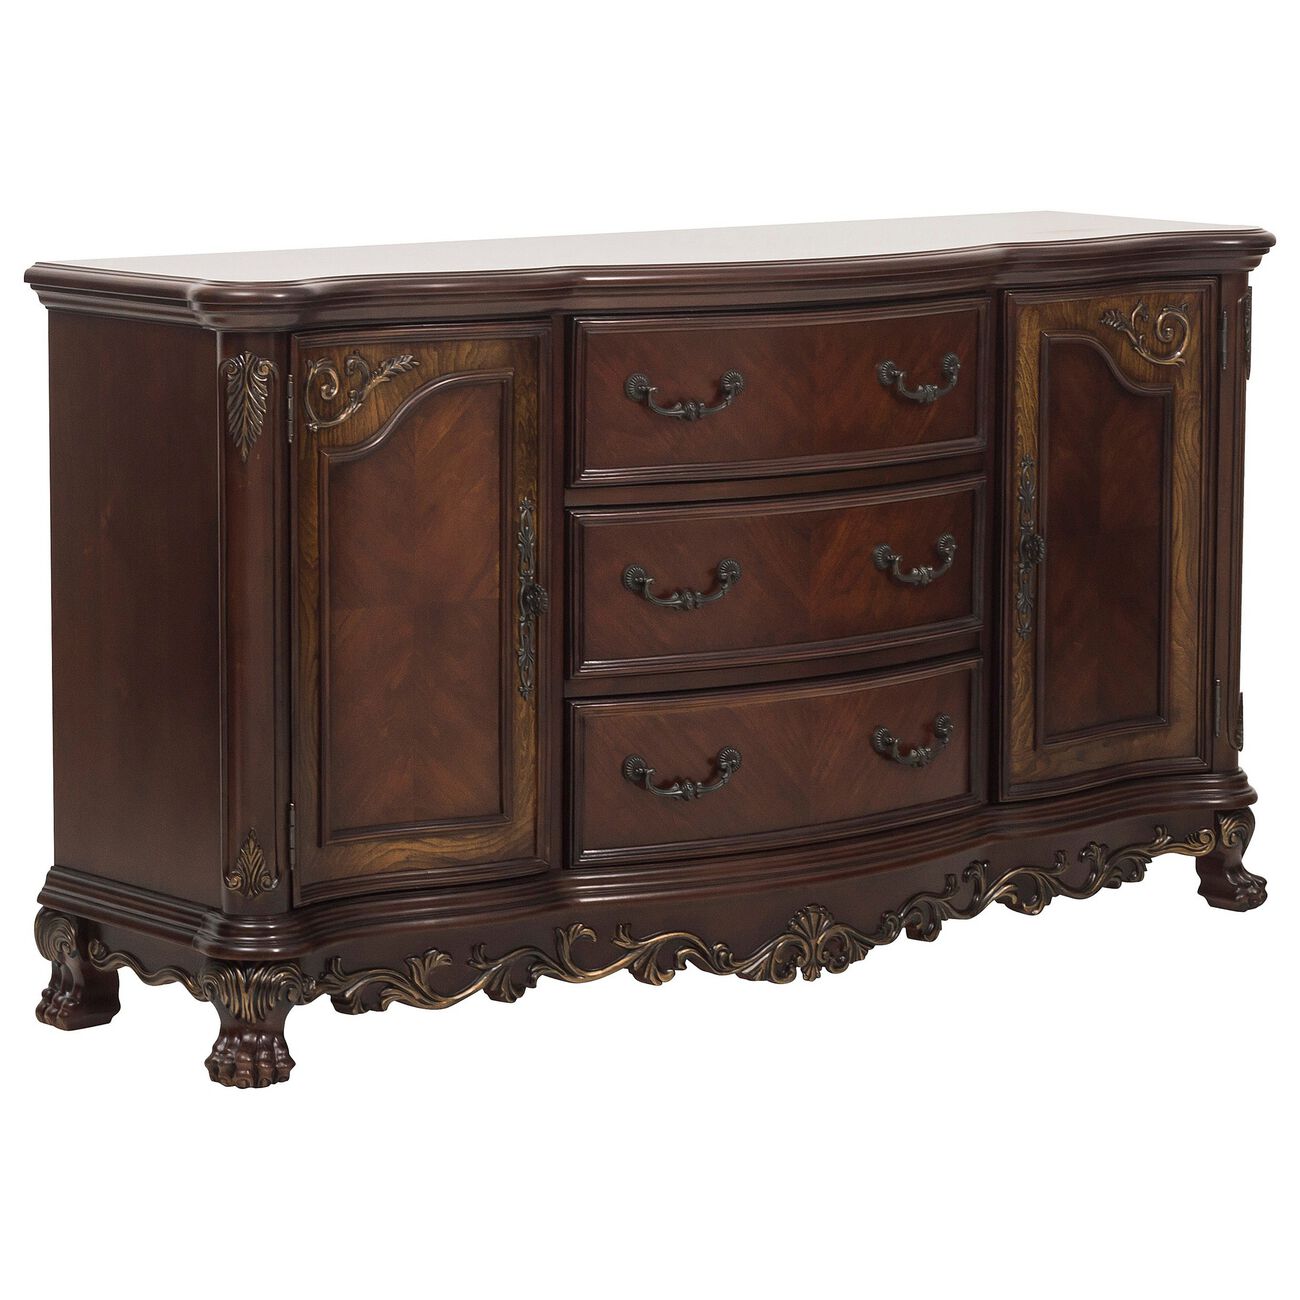 2 Doors Cabinet Wooden Buffet with 3 Drawers and Claw Feet, Cherry Brown